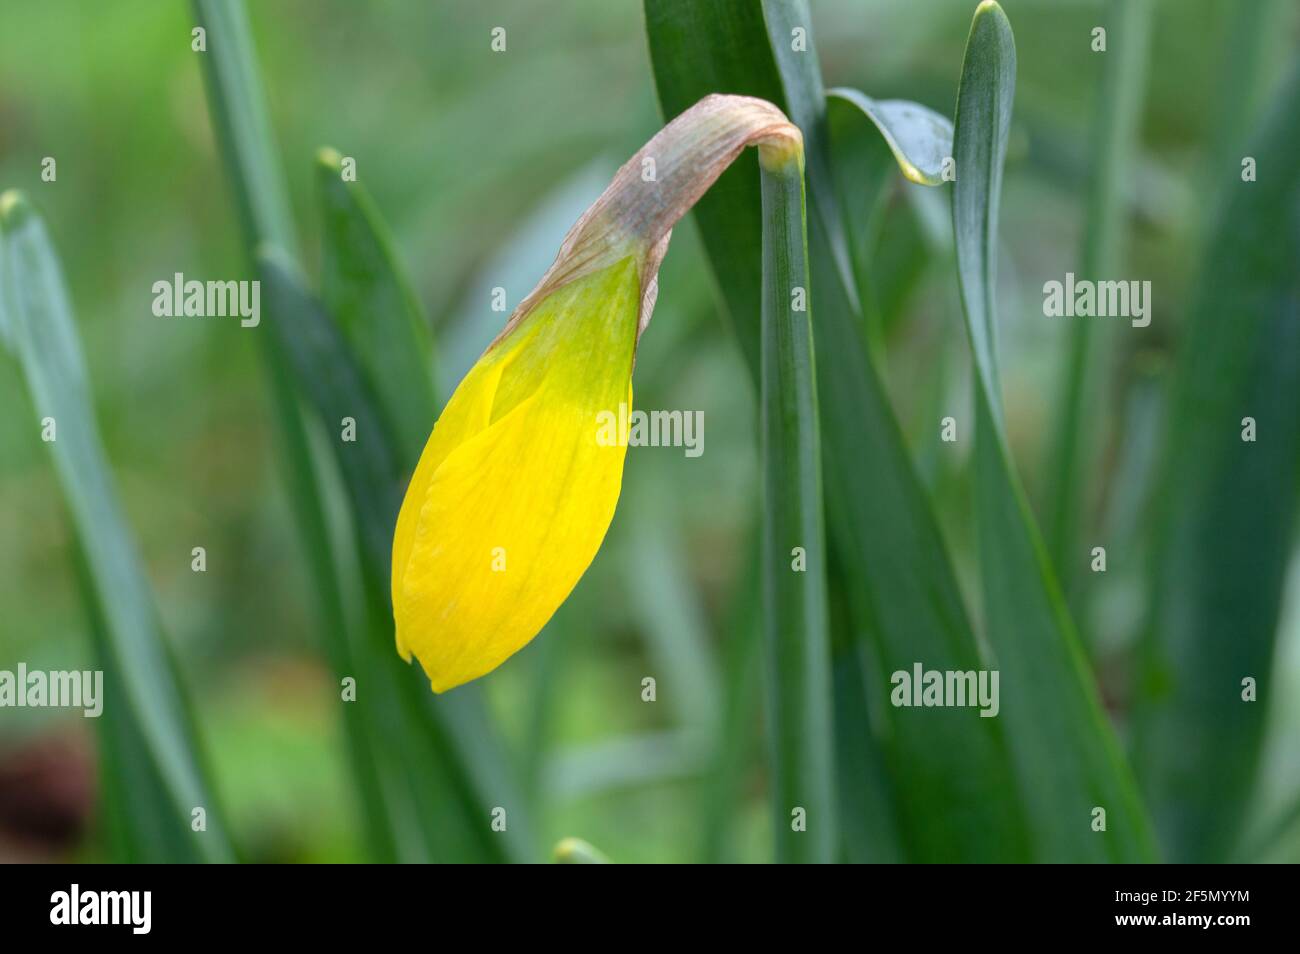 Close Up Of A Bud Of A Narcissus Flower At Amsterdam The Netherlands 22-3-2021 Stock Photo